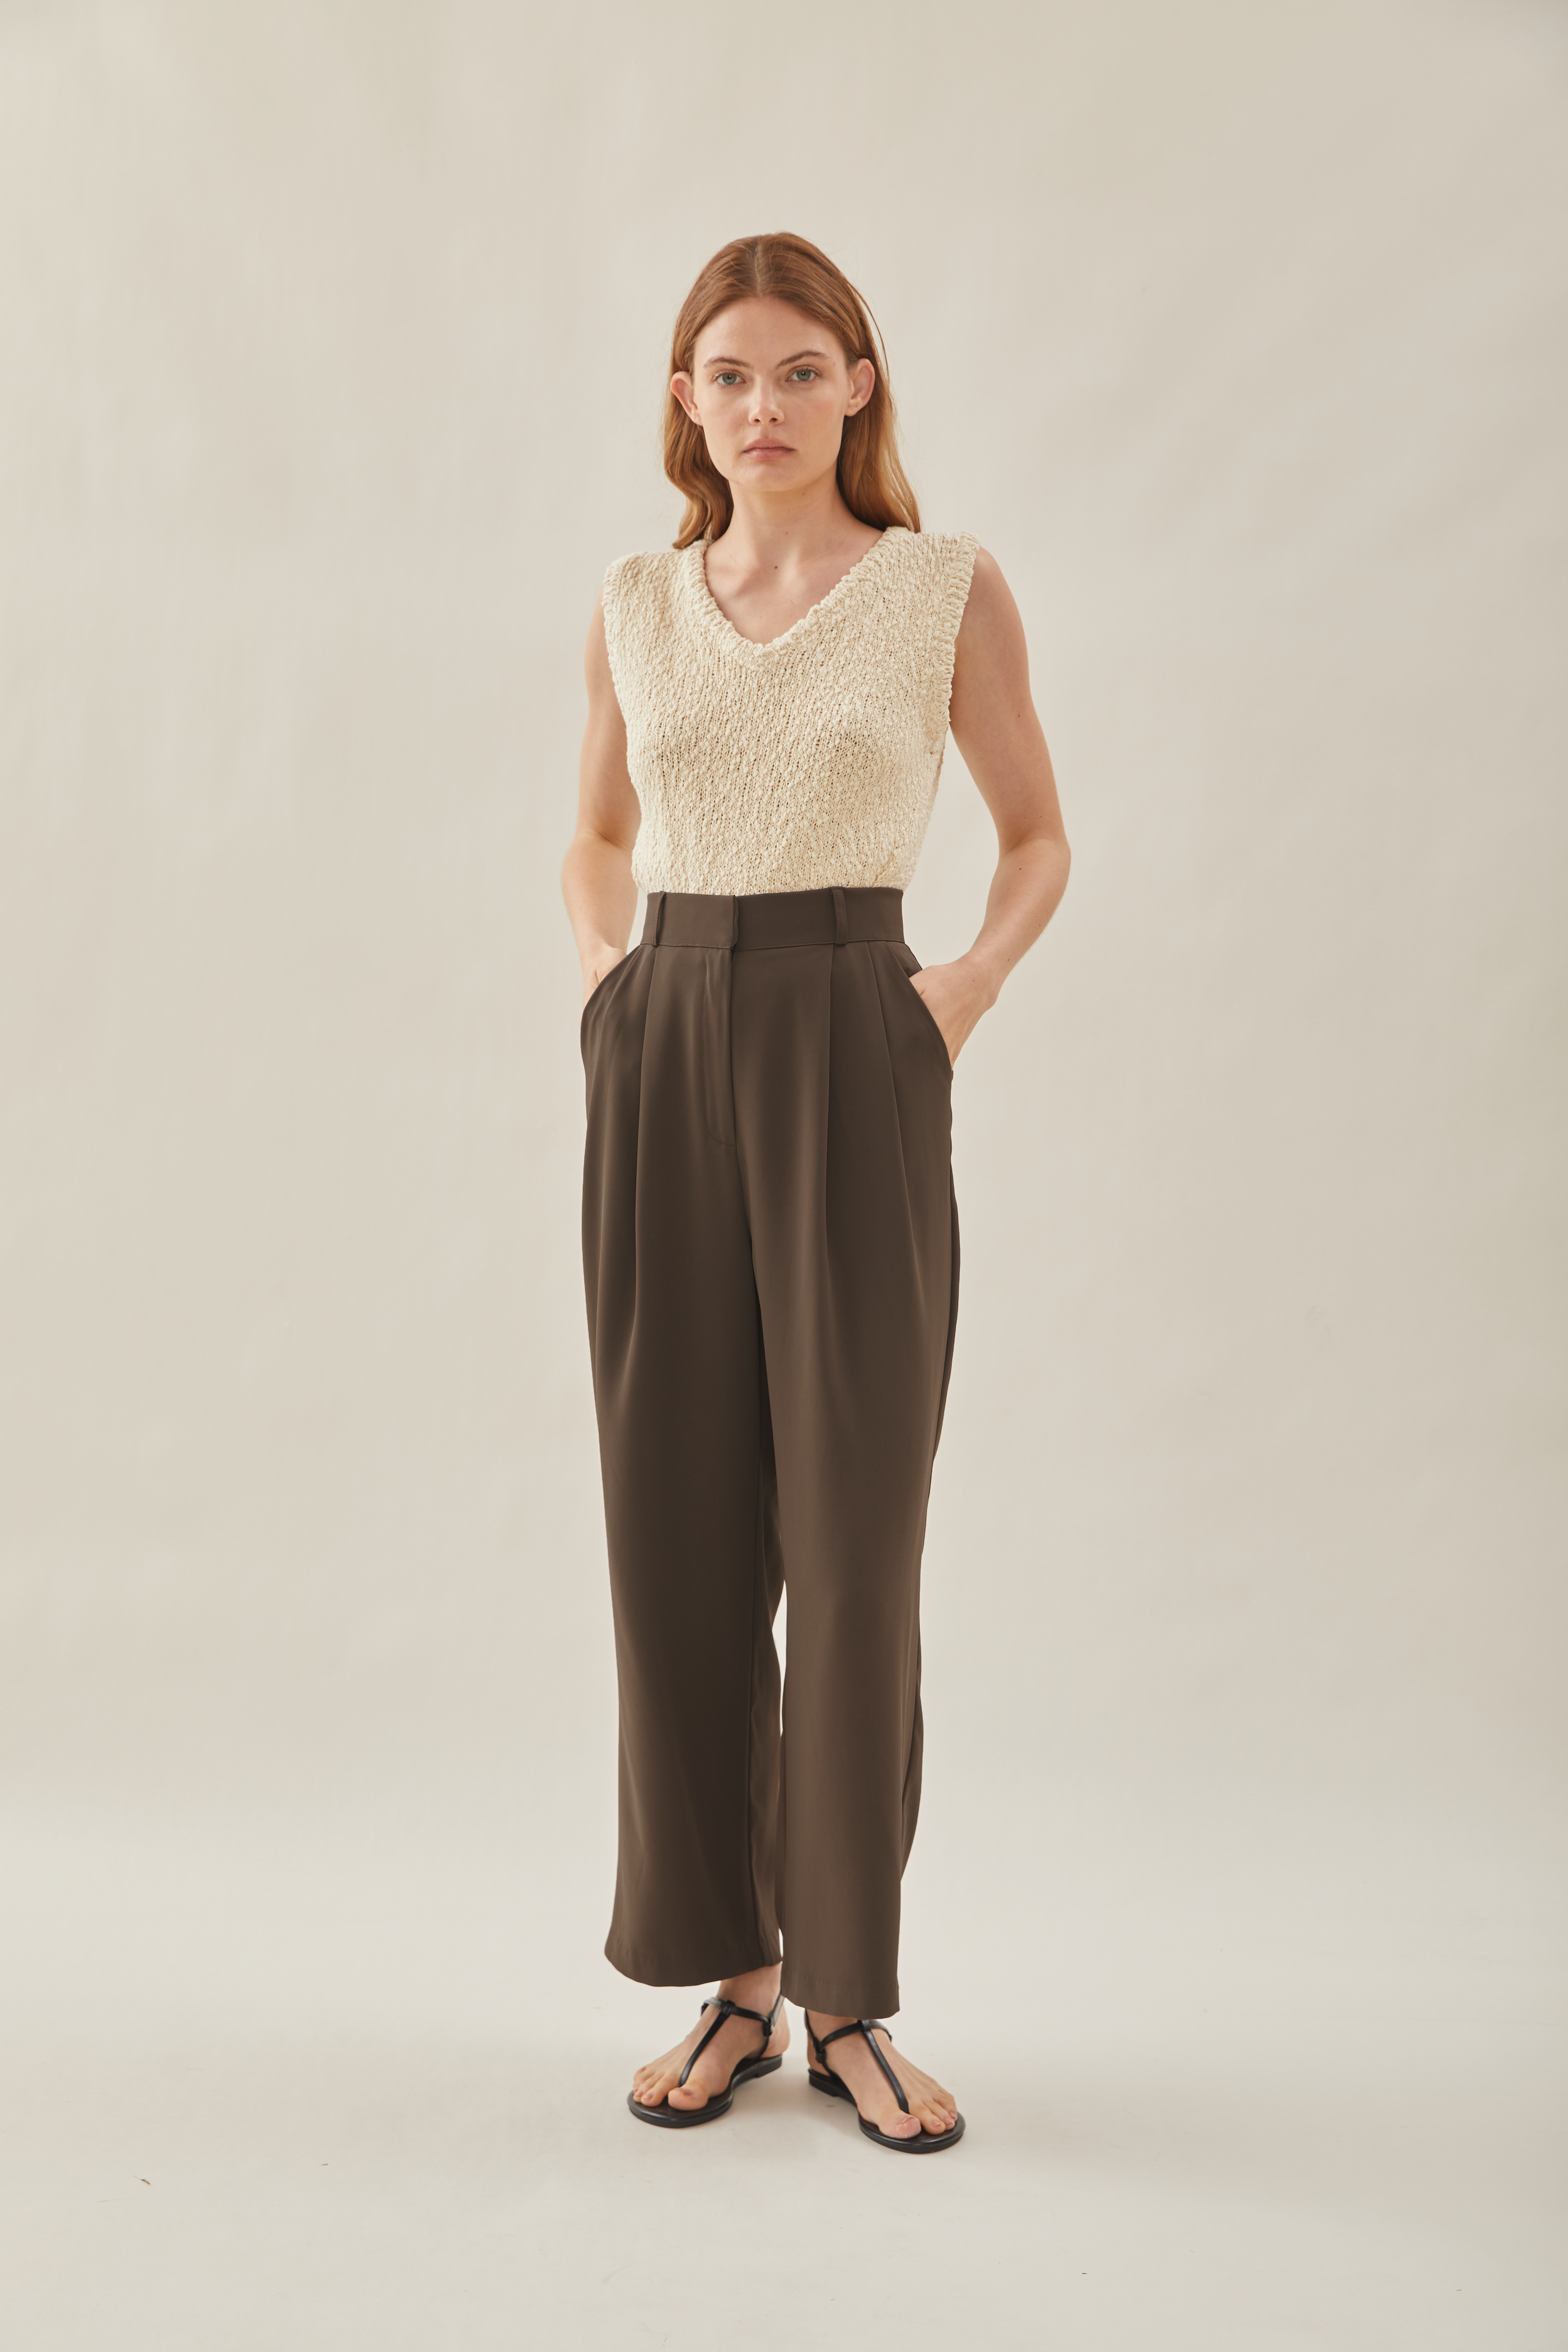 Tailored Wide Leg Pants in Toffee